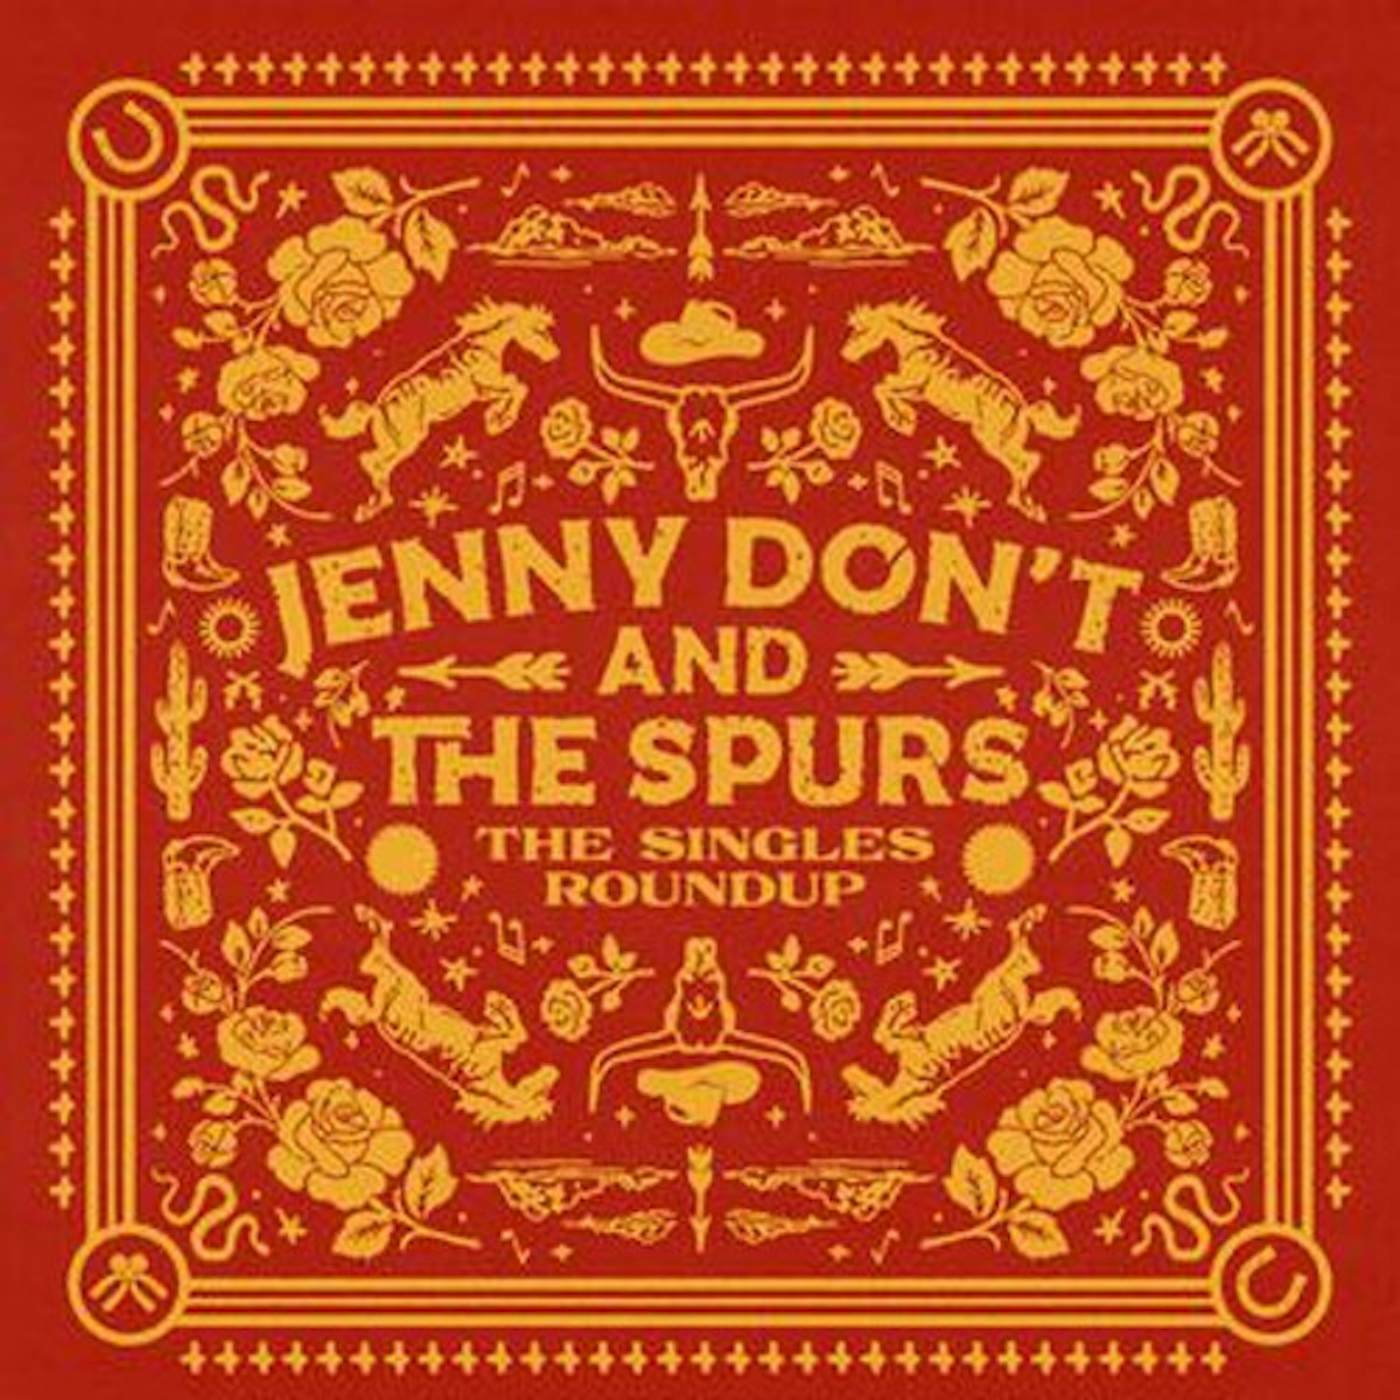 Jenny Don't And The Spurs SINGLES ROUNDUP CD